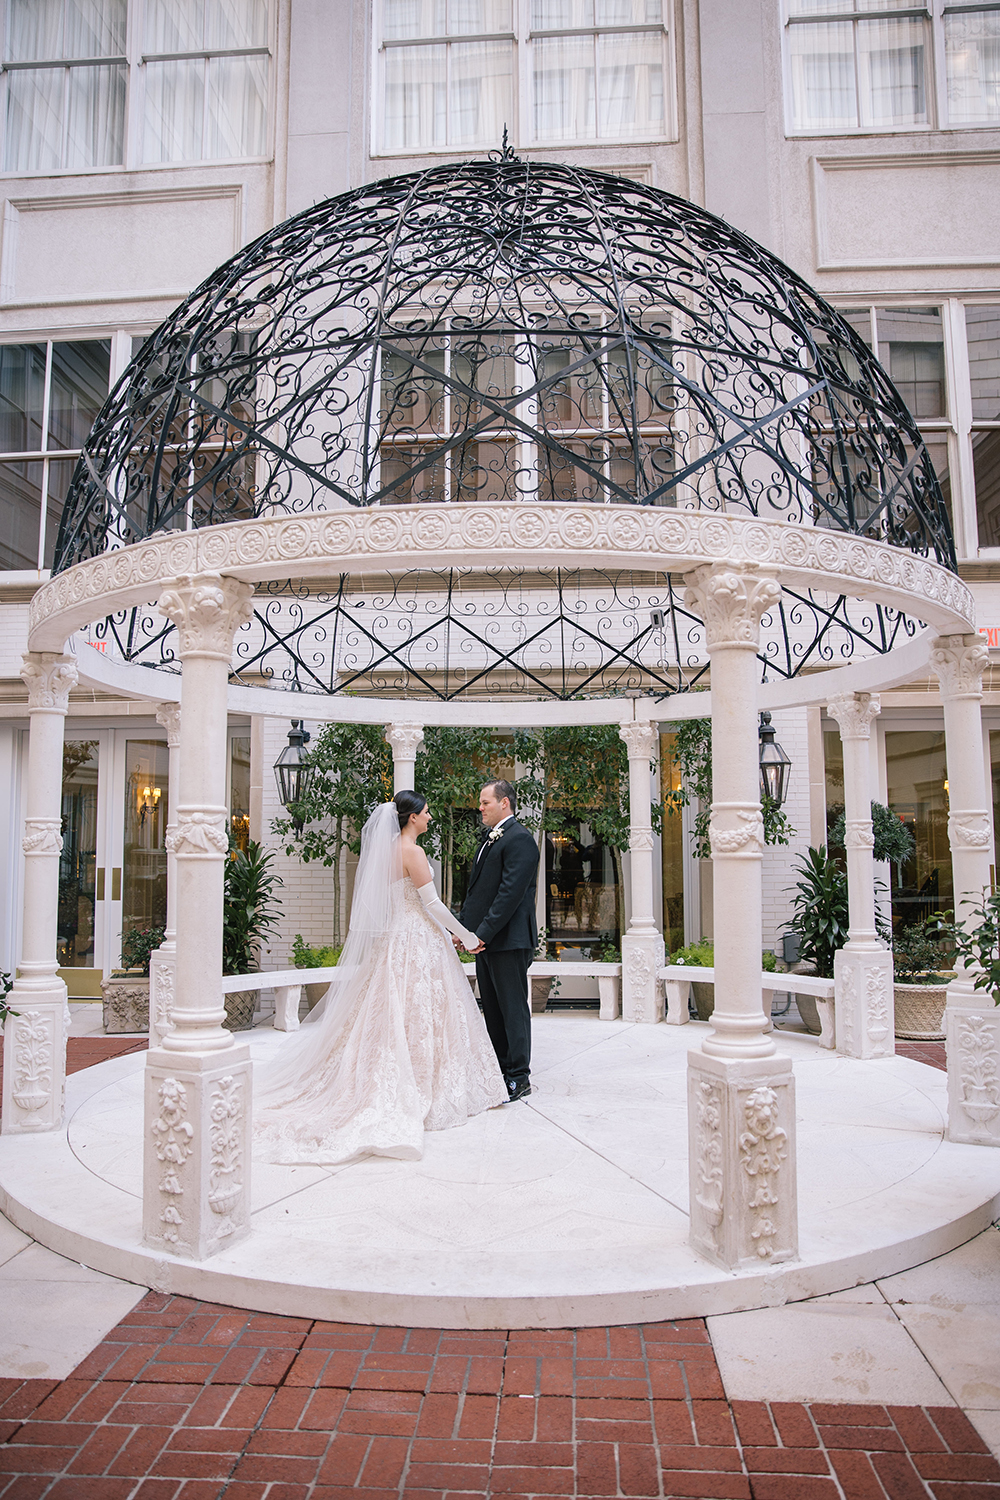 Francesca and Stanton's first look in the Ritz Carlton's courtyard.